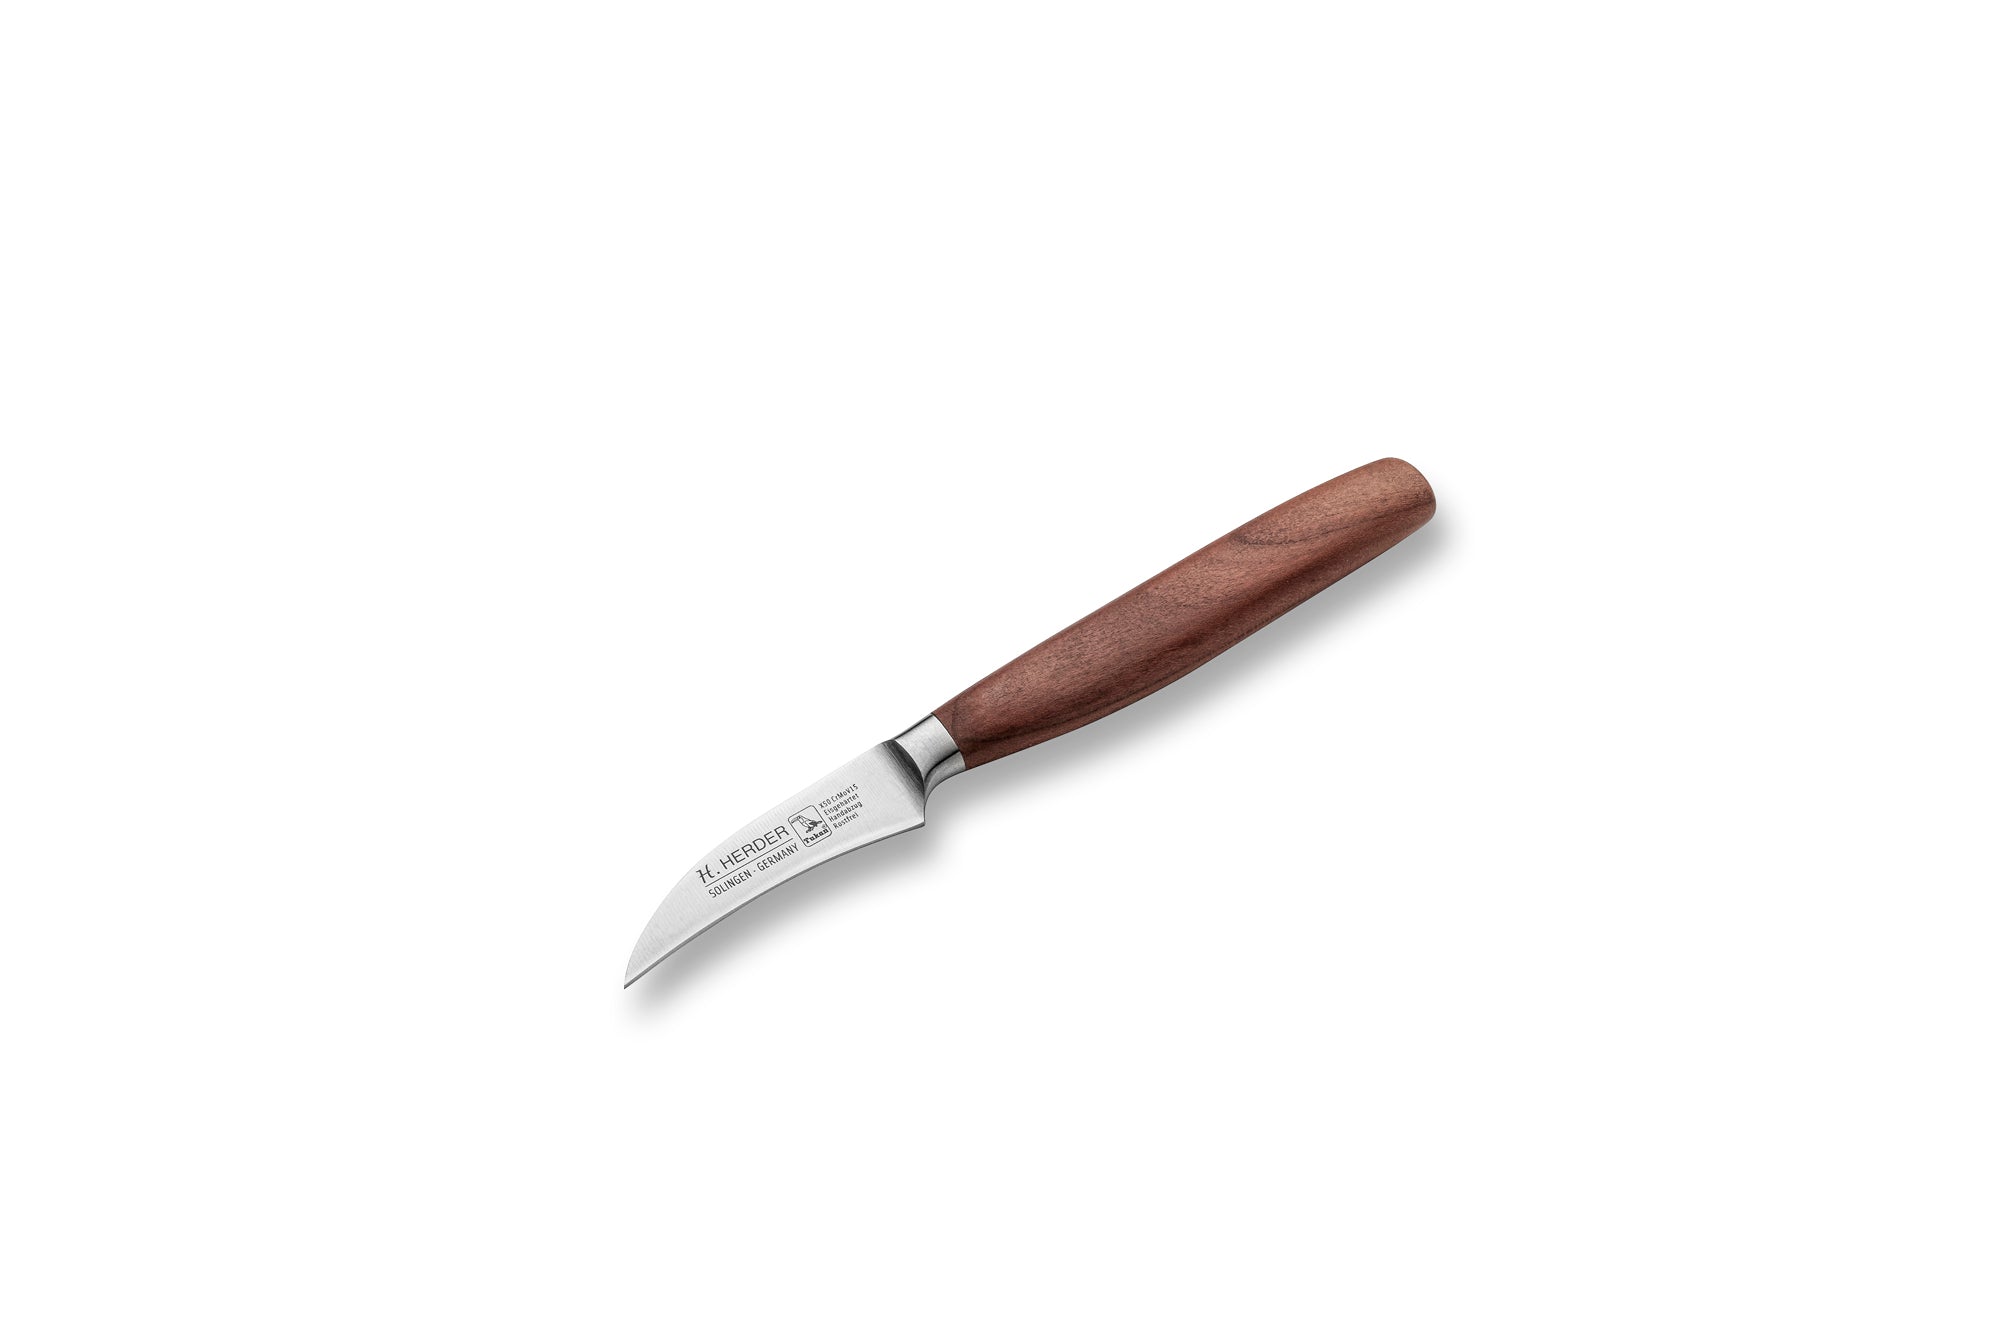 Paring knife Eterno, plum wood, blade length 7cm, forged, curved